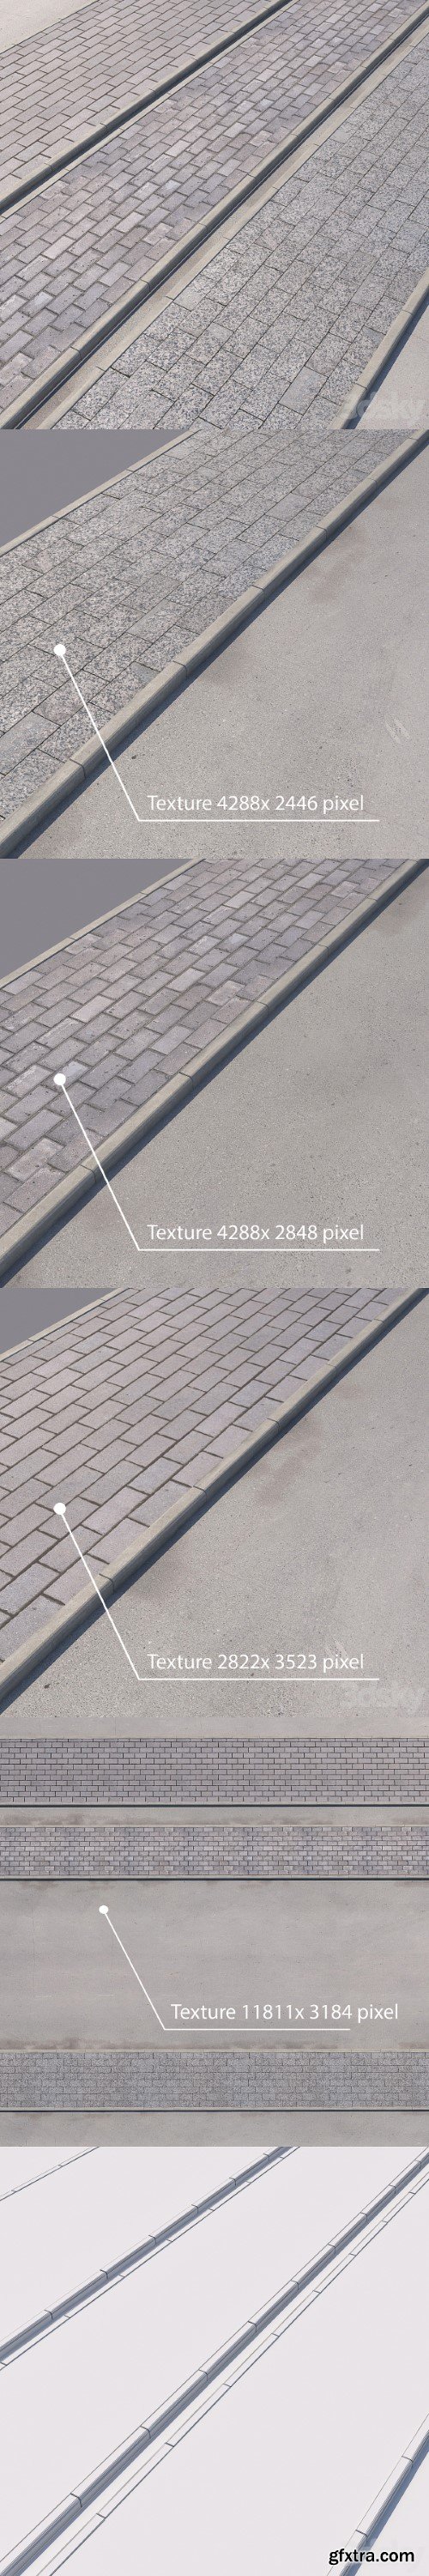 3 variants of pavement with road set_4 | Vray